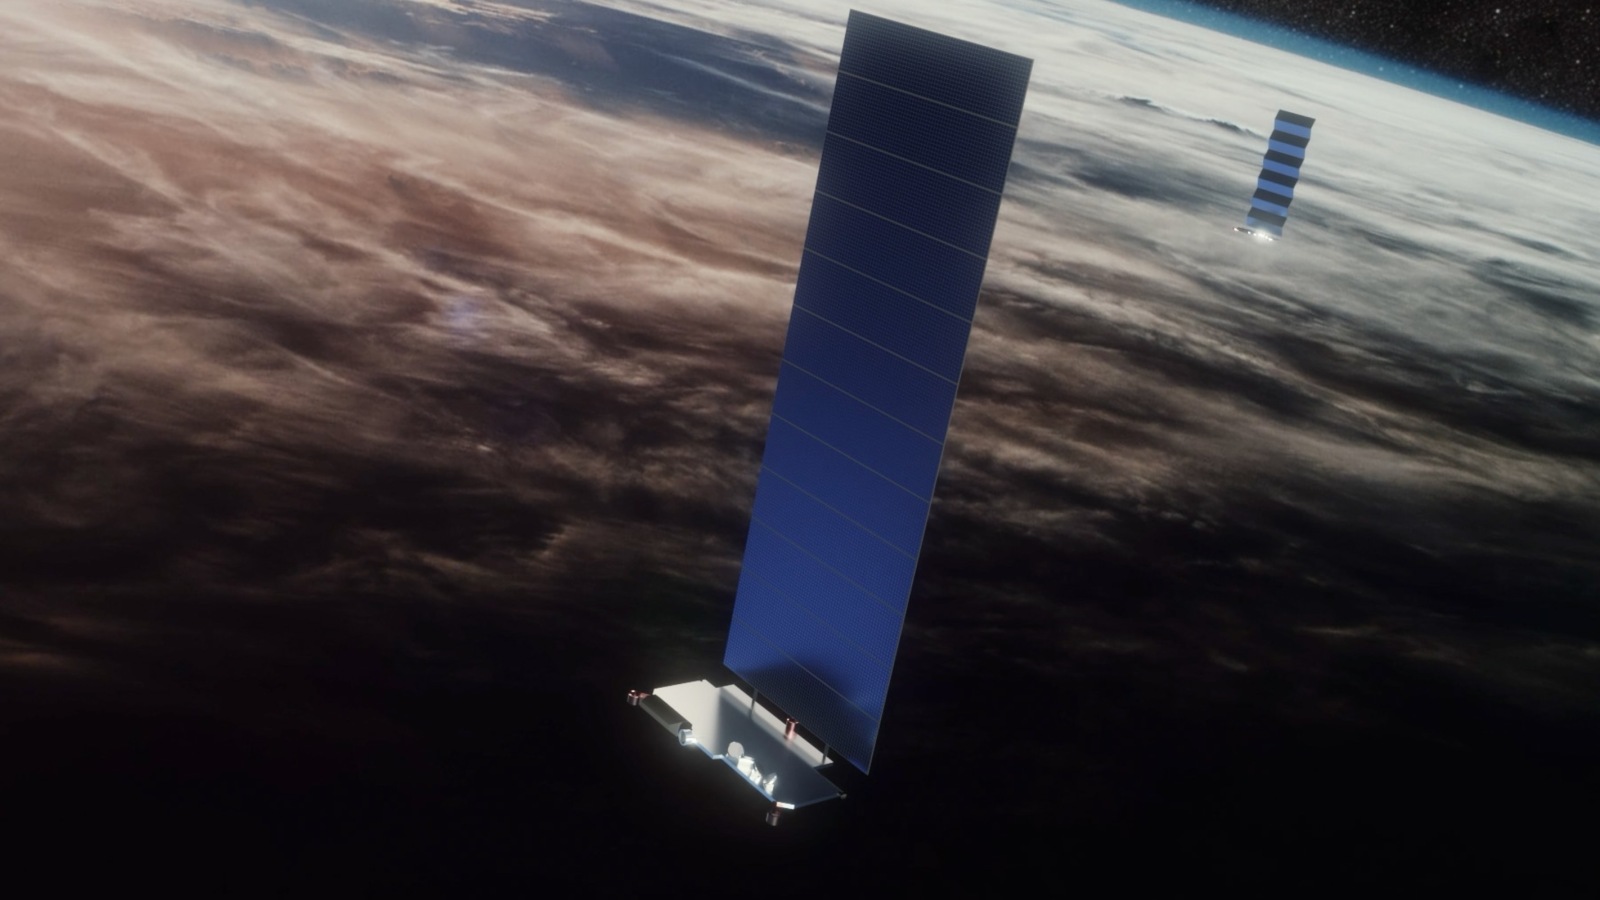 Why Deorbiting SpaceX Satellites Is a ‘Tremendous Opportunity’ for the Space Force